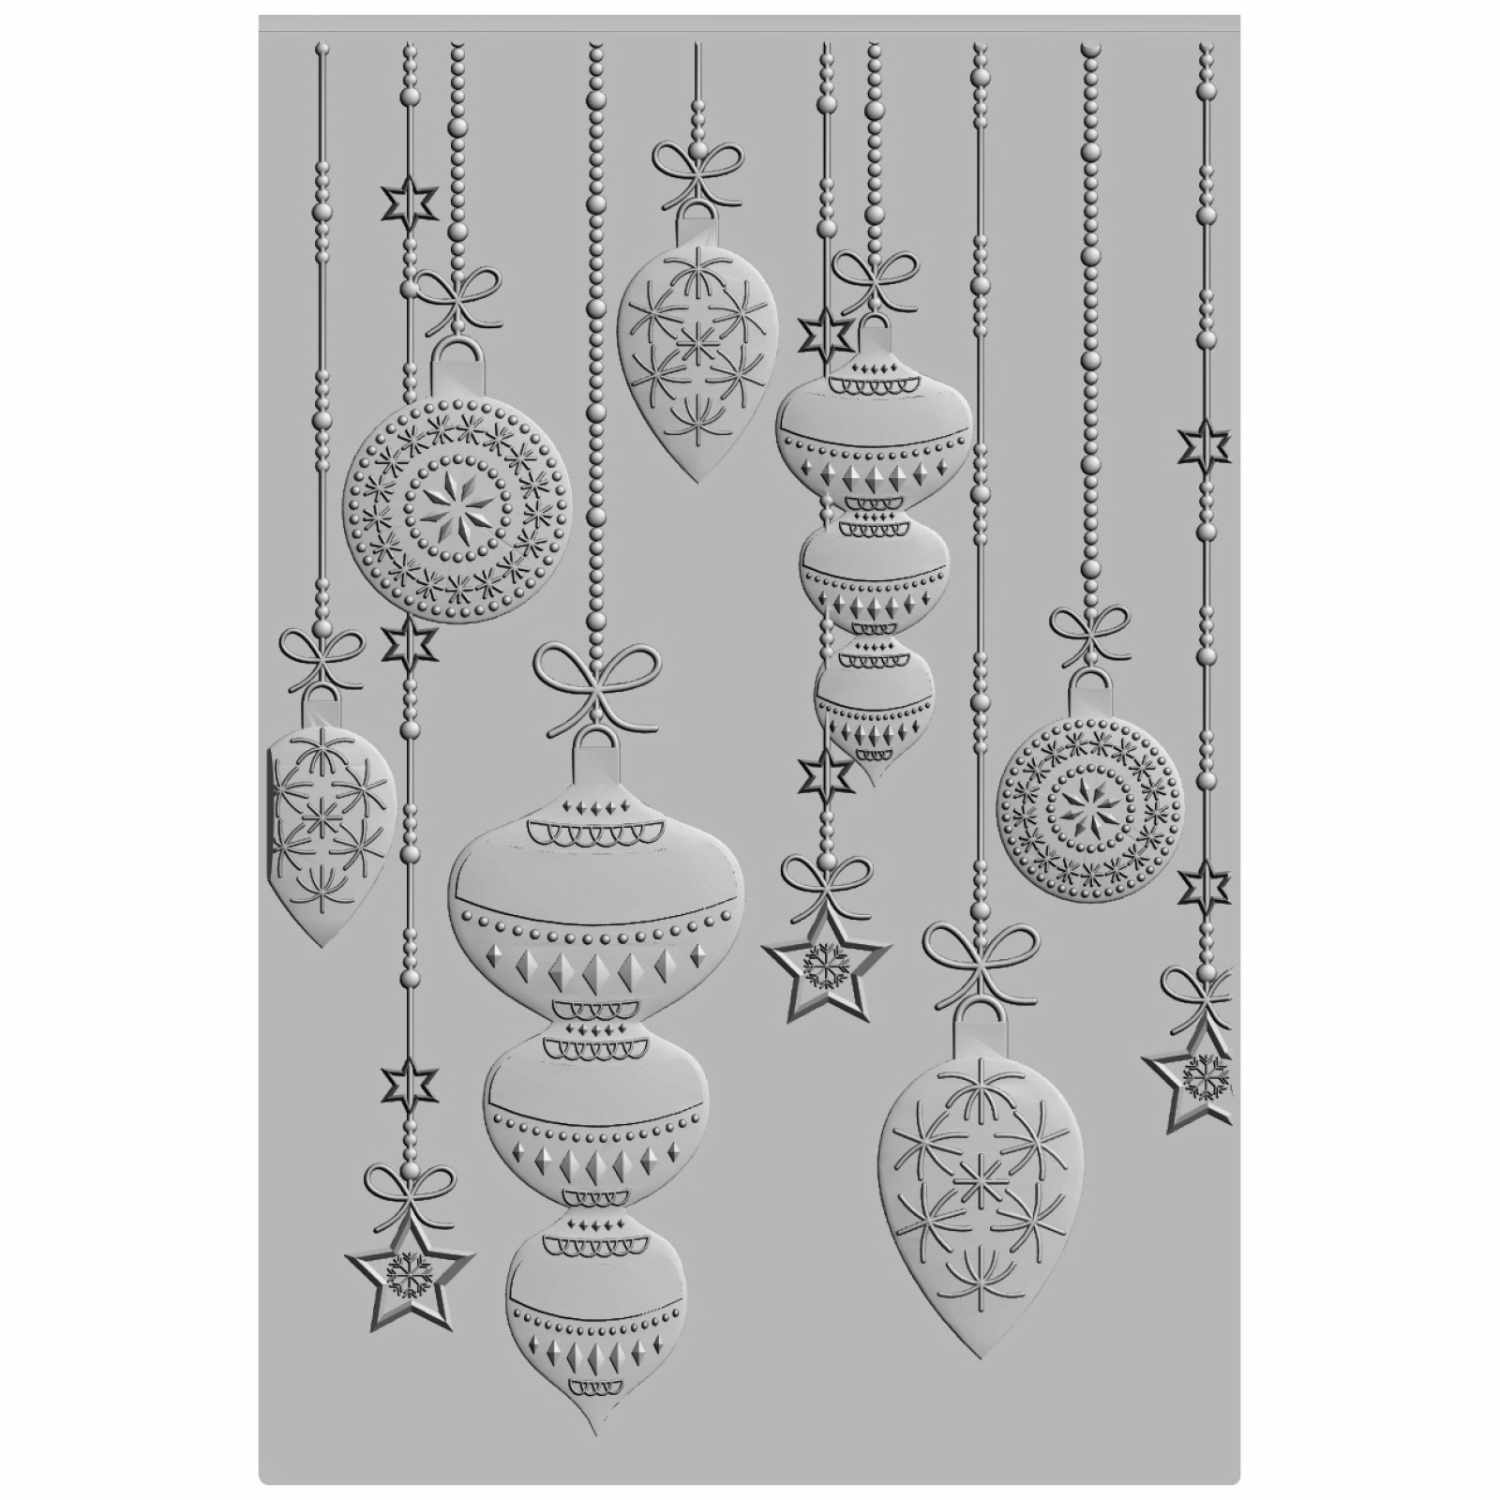 3D Textured Impressions Embossing Folder Sparkly Ornaments